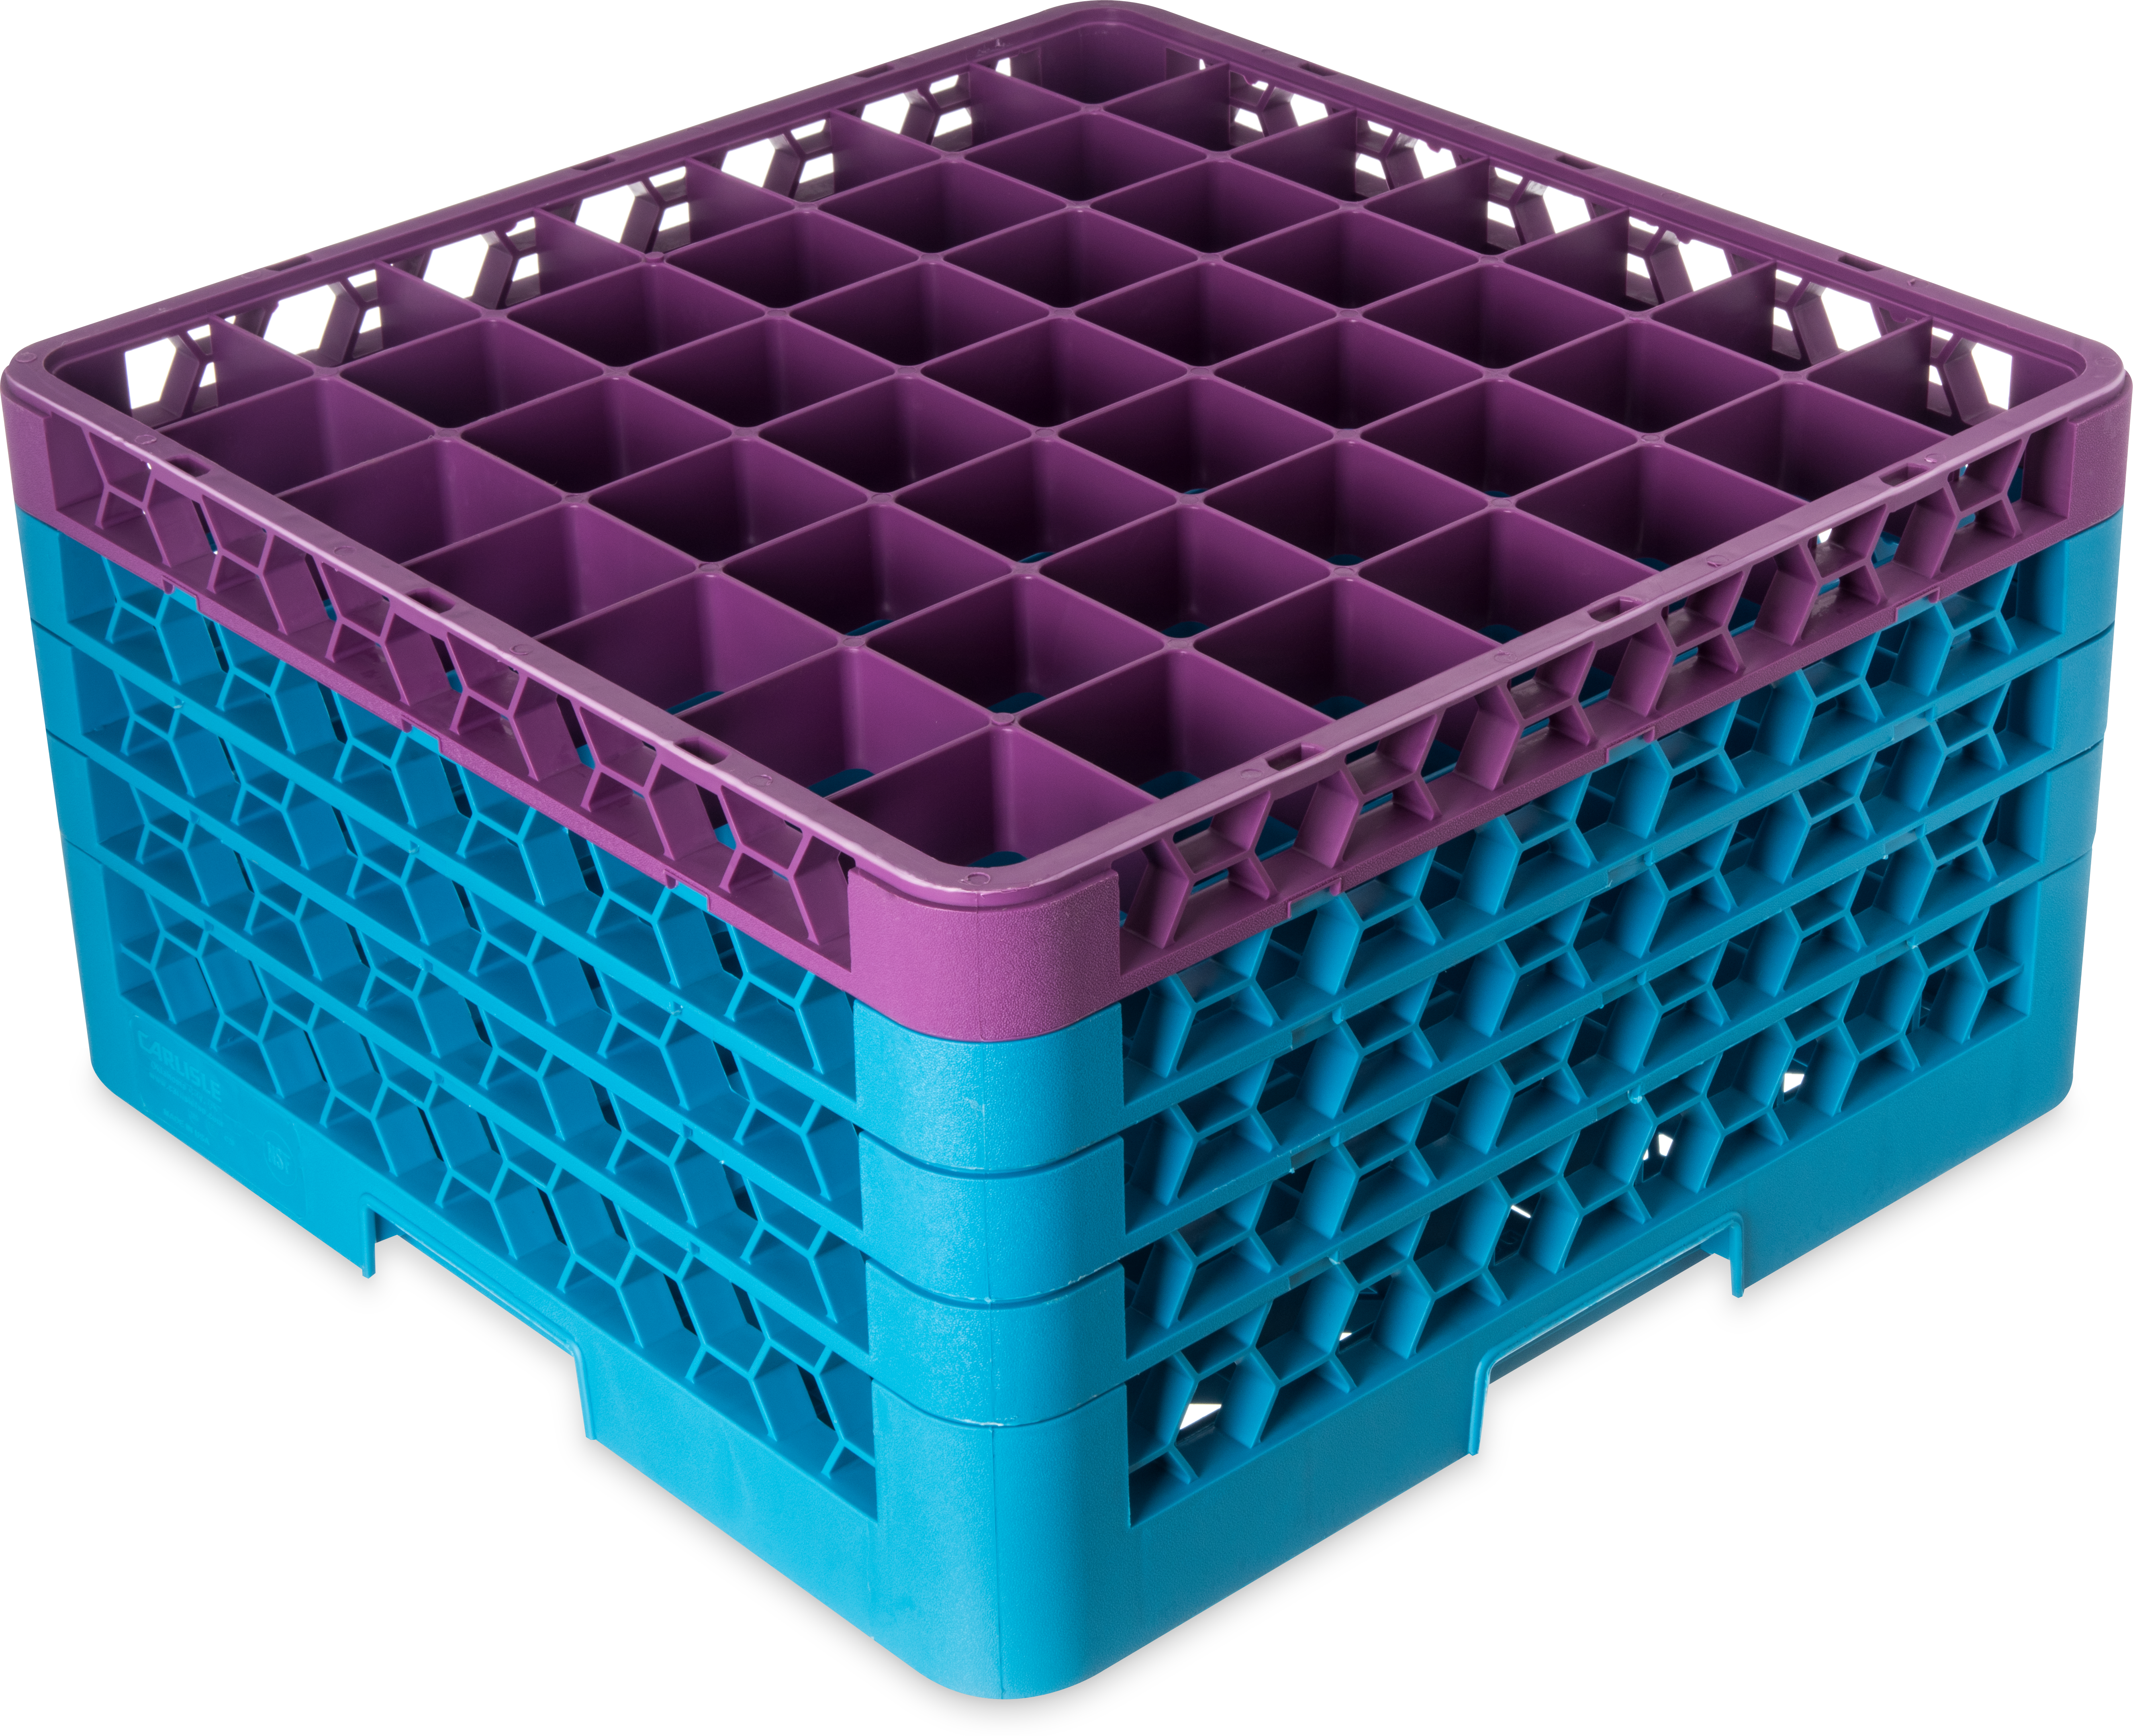 OptiClean 49 Compartment Glass Rack with 4 Extenders 10.3 - Lavender-Carlisle Blue